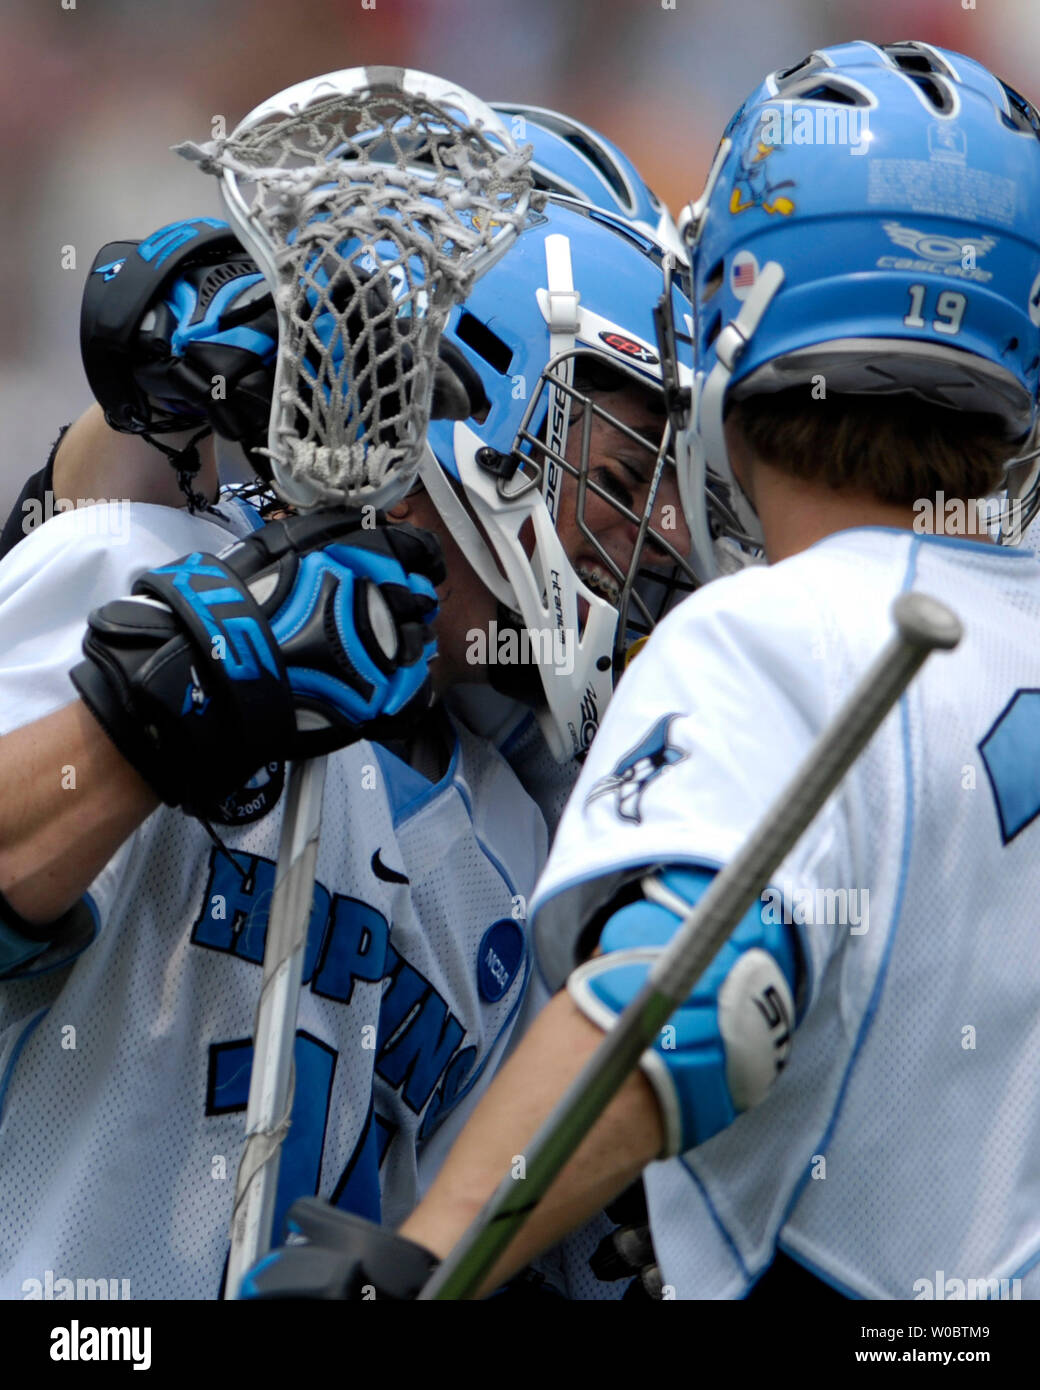 Johns Hopkins University Blue Jays Michael Kimmel (l) is congratulated by Brian Christopher (19) after scoring a goal in the third quarter against the Delaware Blue Hens in the semi-final of the NCAA Division I lacrosse championship at M&T Bank Stadium in Baltimore, Maryland on May 26, 2007.   Johns Hopkins defeated Delaware 8-3 to move to the lacrosse championship.   (UPI Photo/ Mark Goldman) Stock Photo